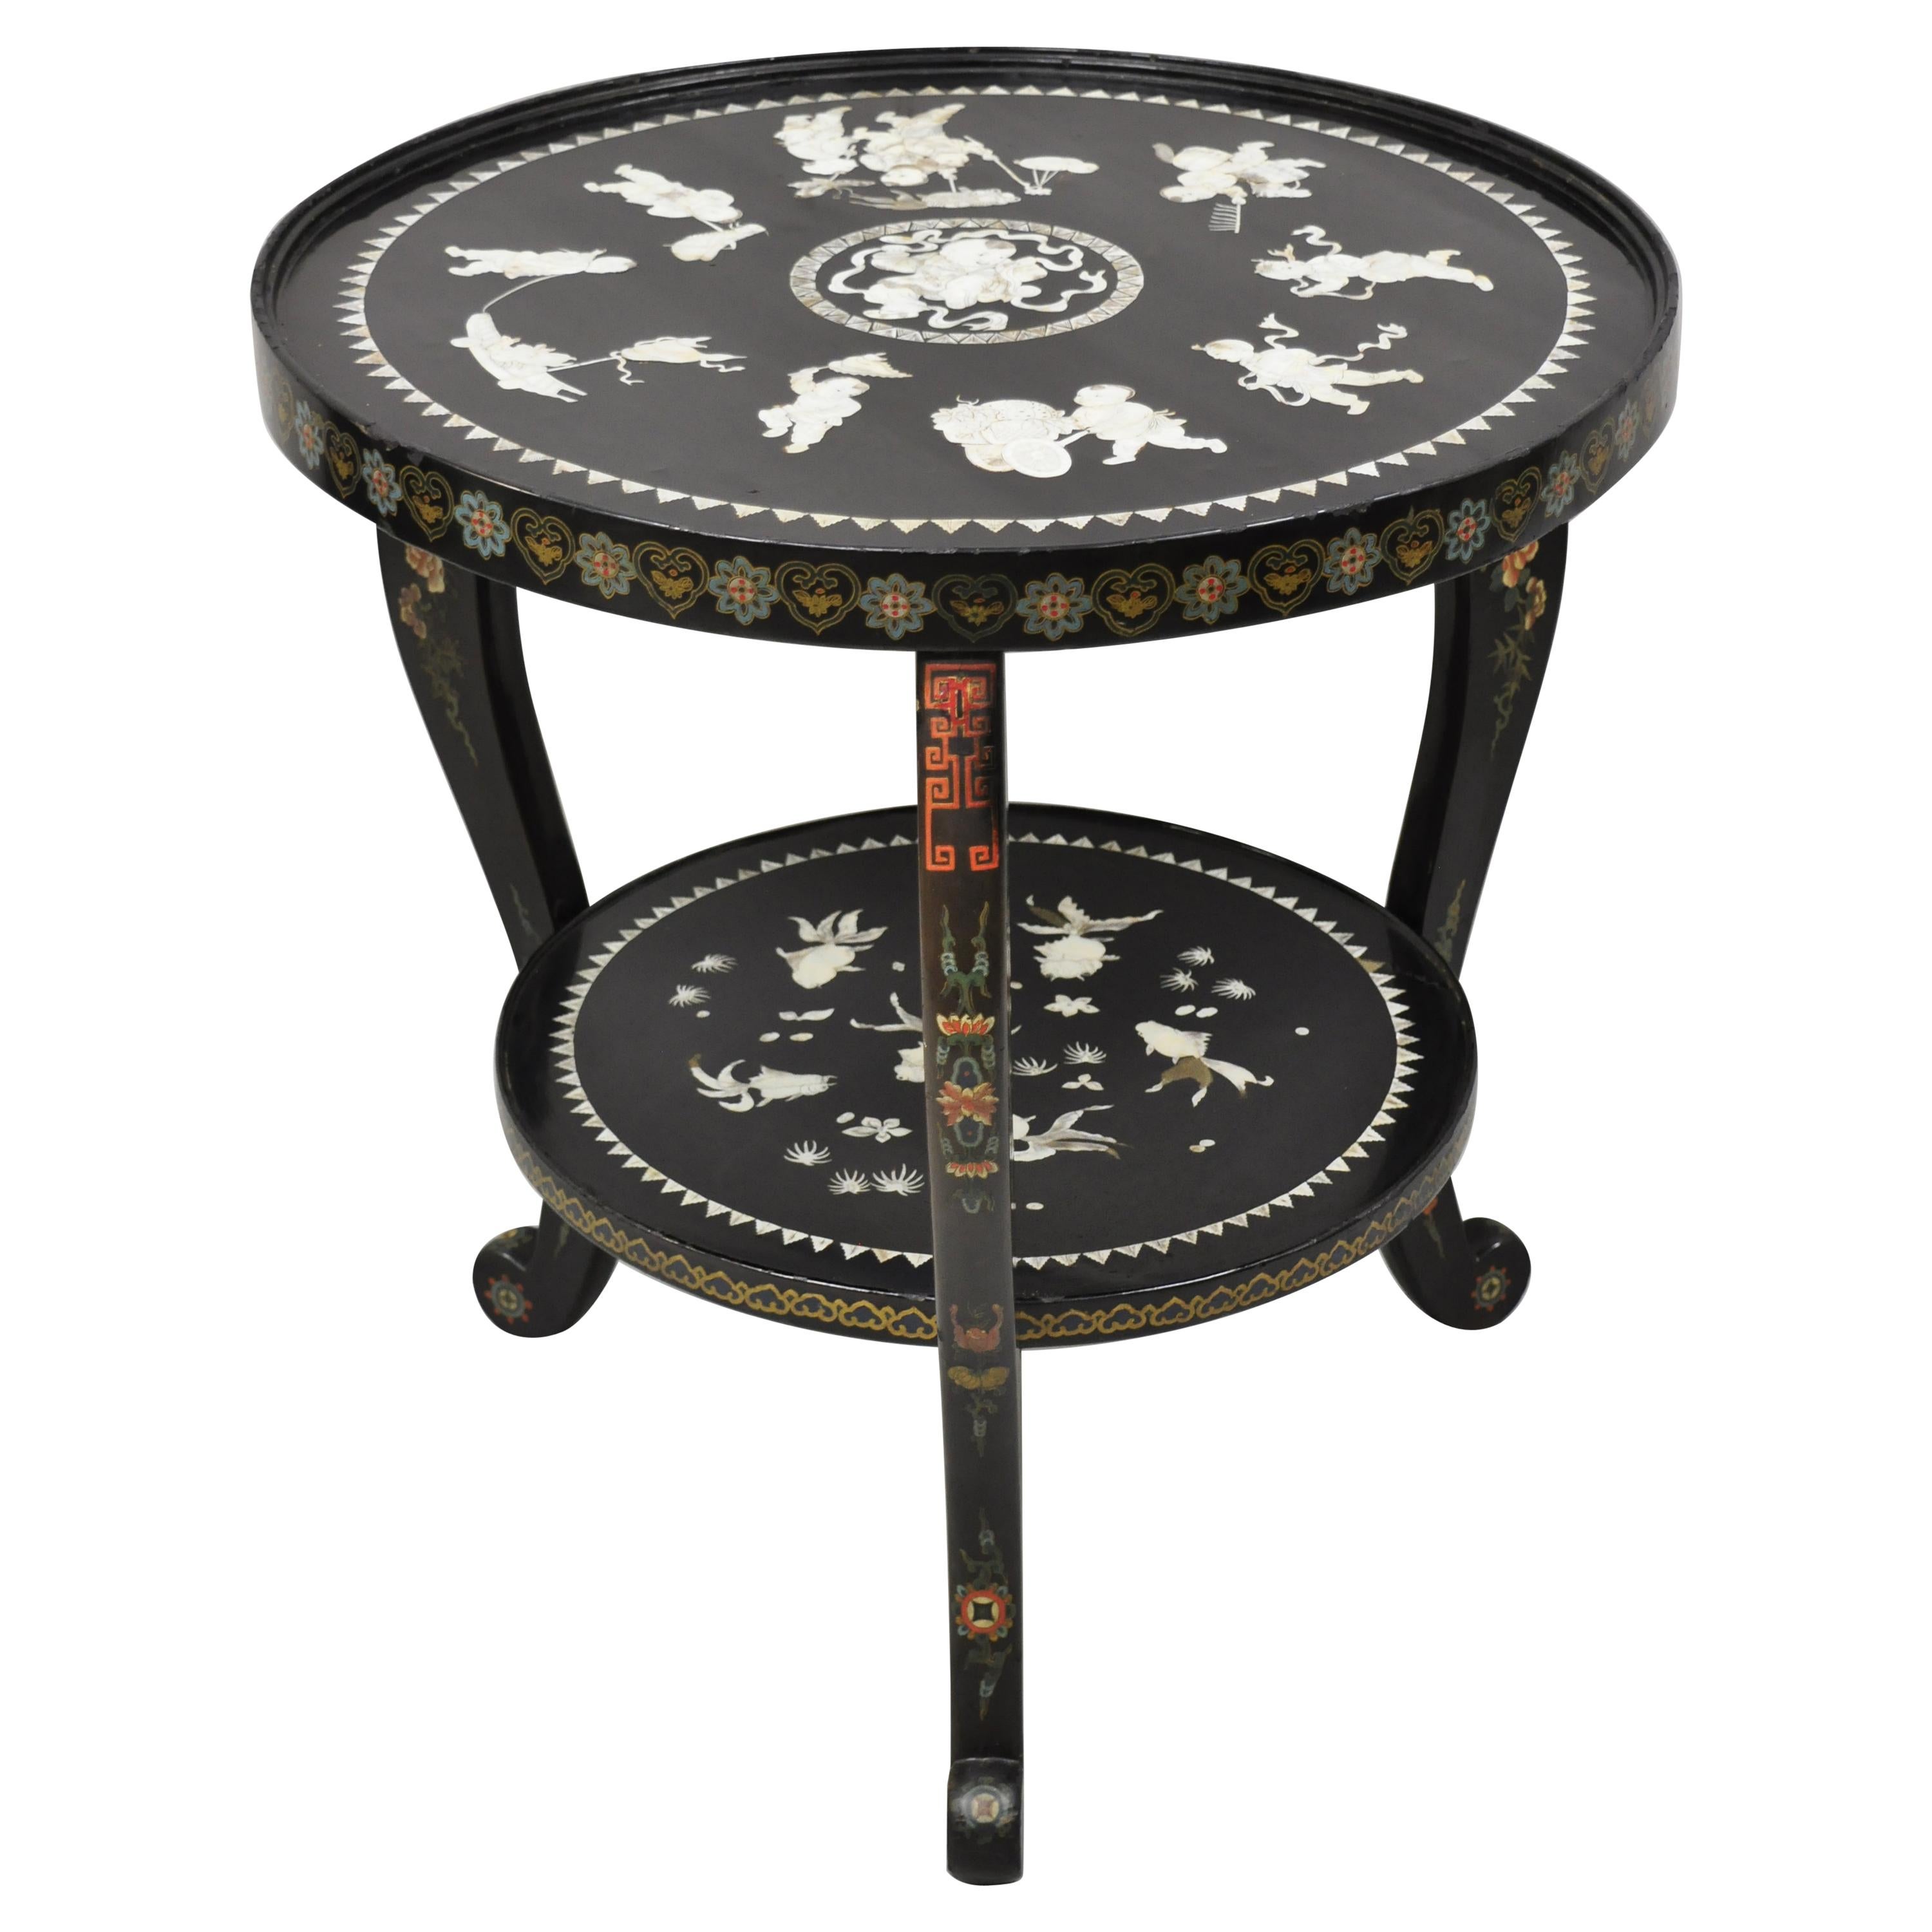 Vintage Chinese Black Lacquer Mother of Pearl Inlay Round Occasional Side Table